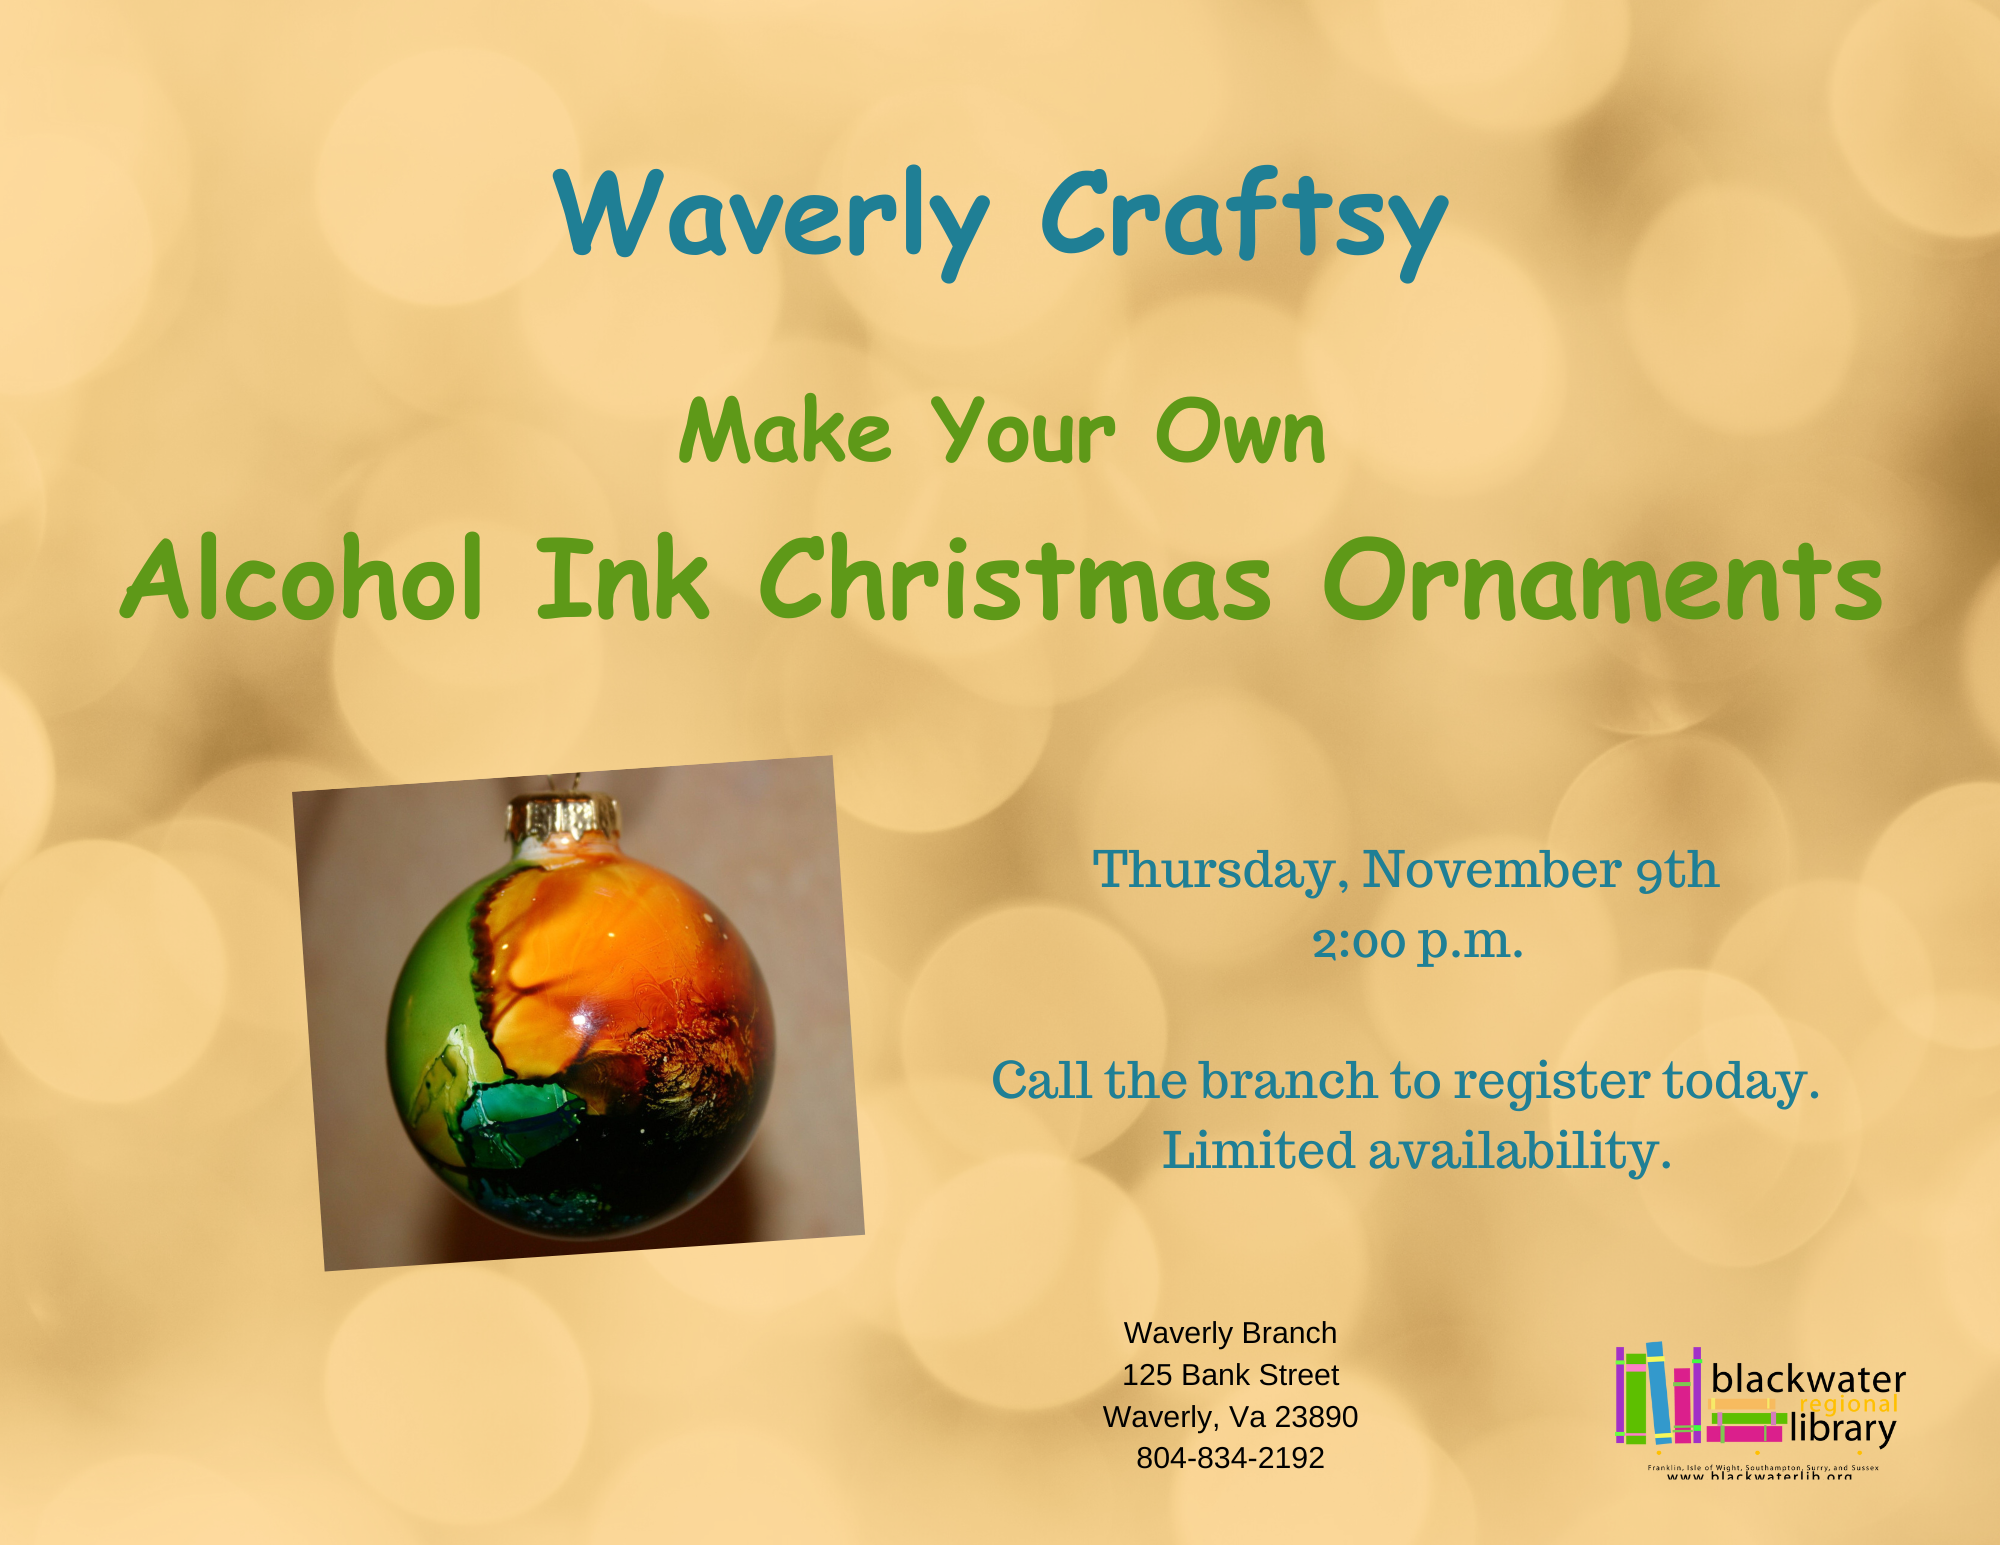 Give us a call to register for Waverly Craftsy in November where we'll create alcohol ink ornaments! 804-899-2192